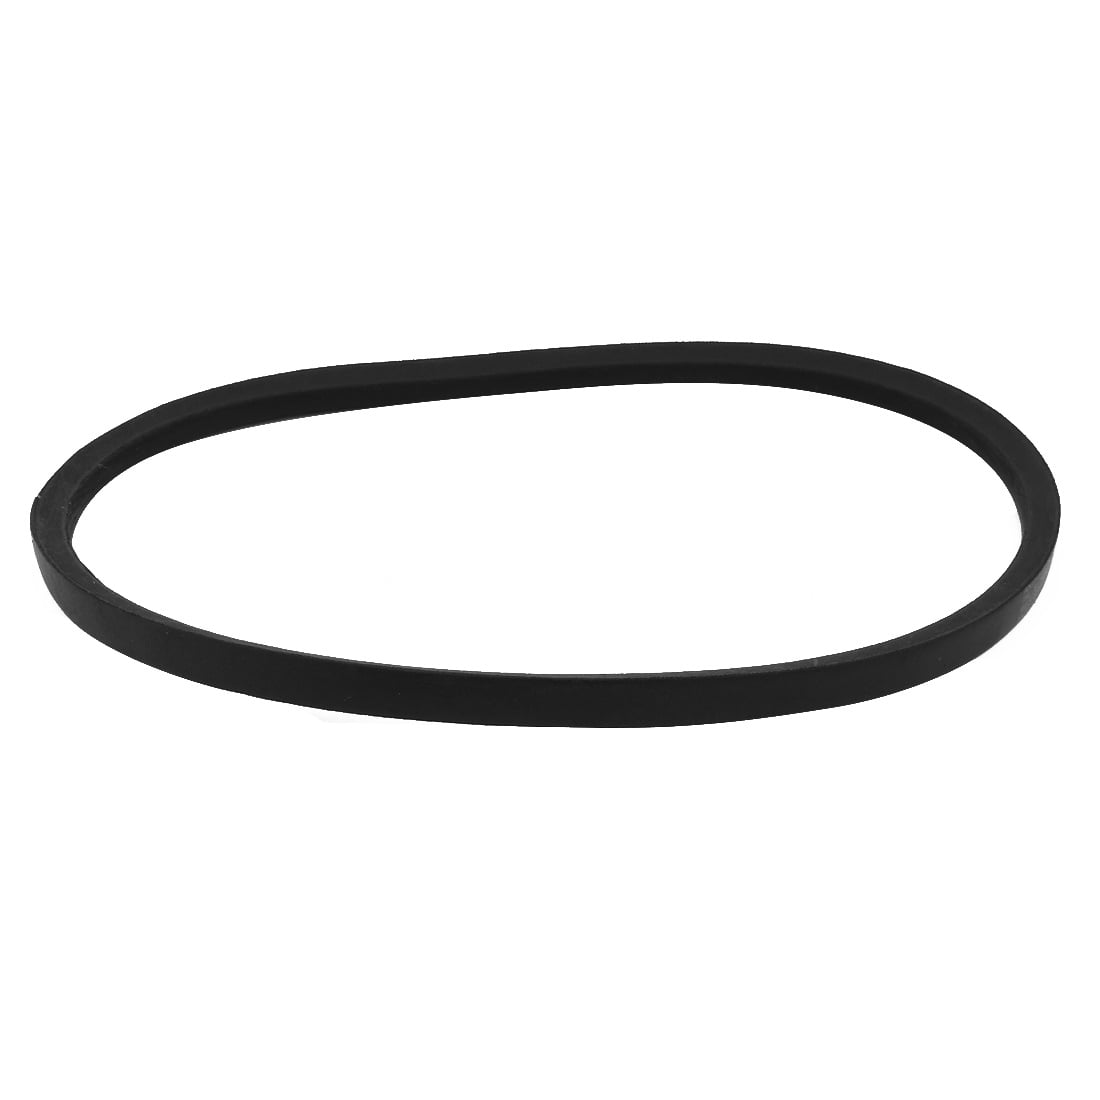 A680 680mm Inner Girth Transmission Drive Belt Washing Machine Replacement